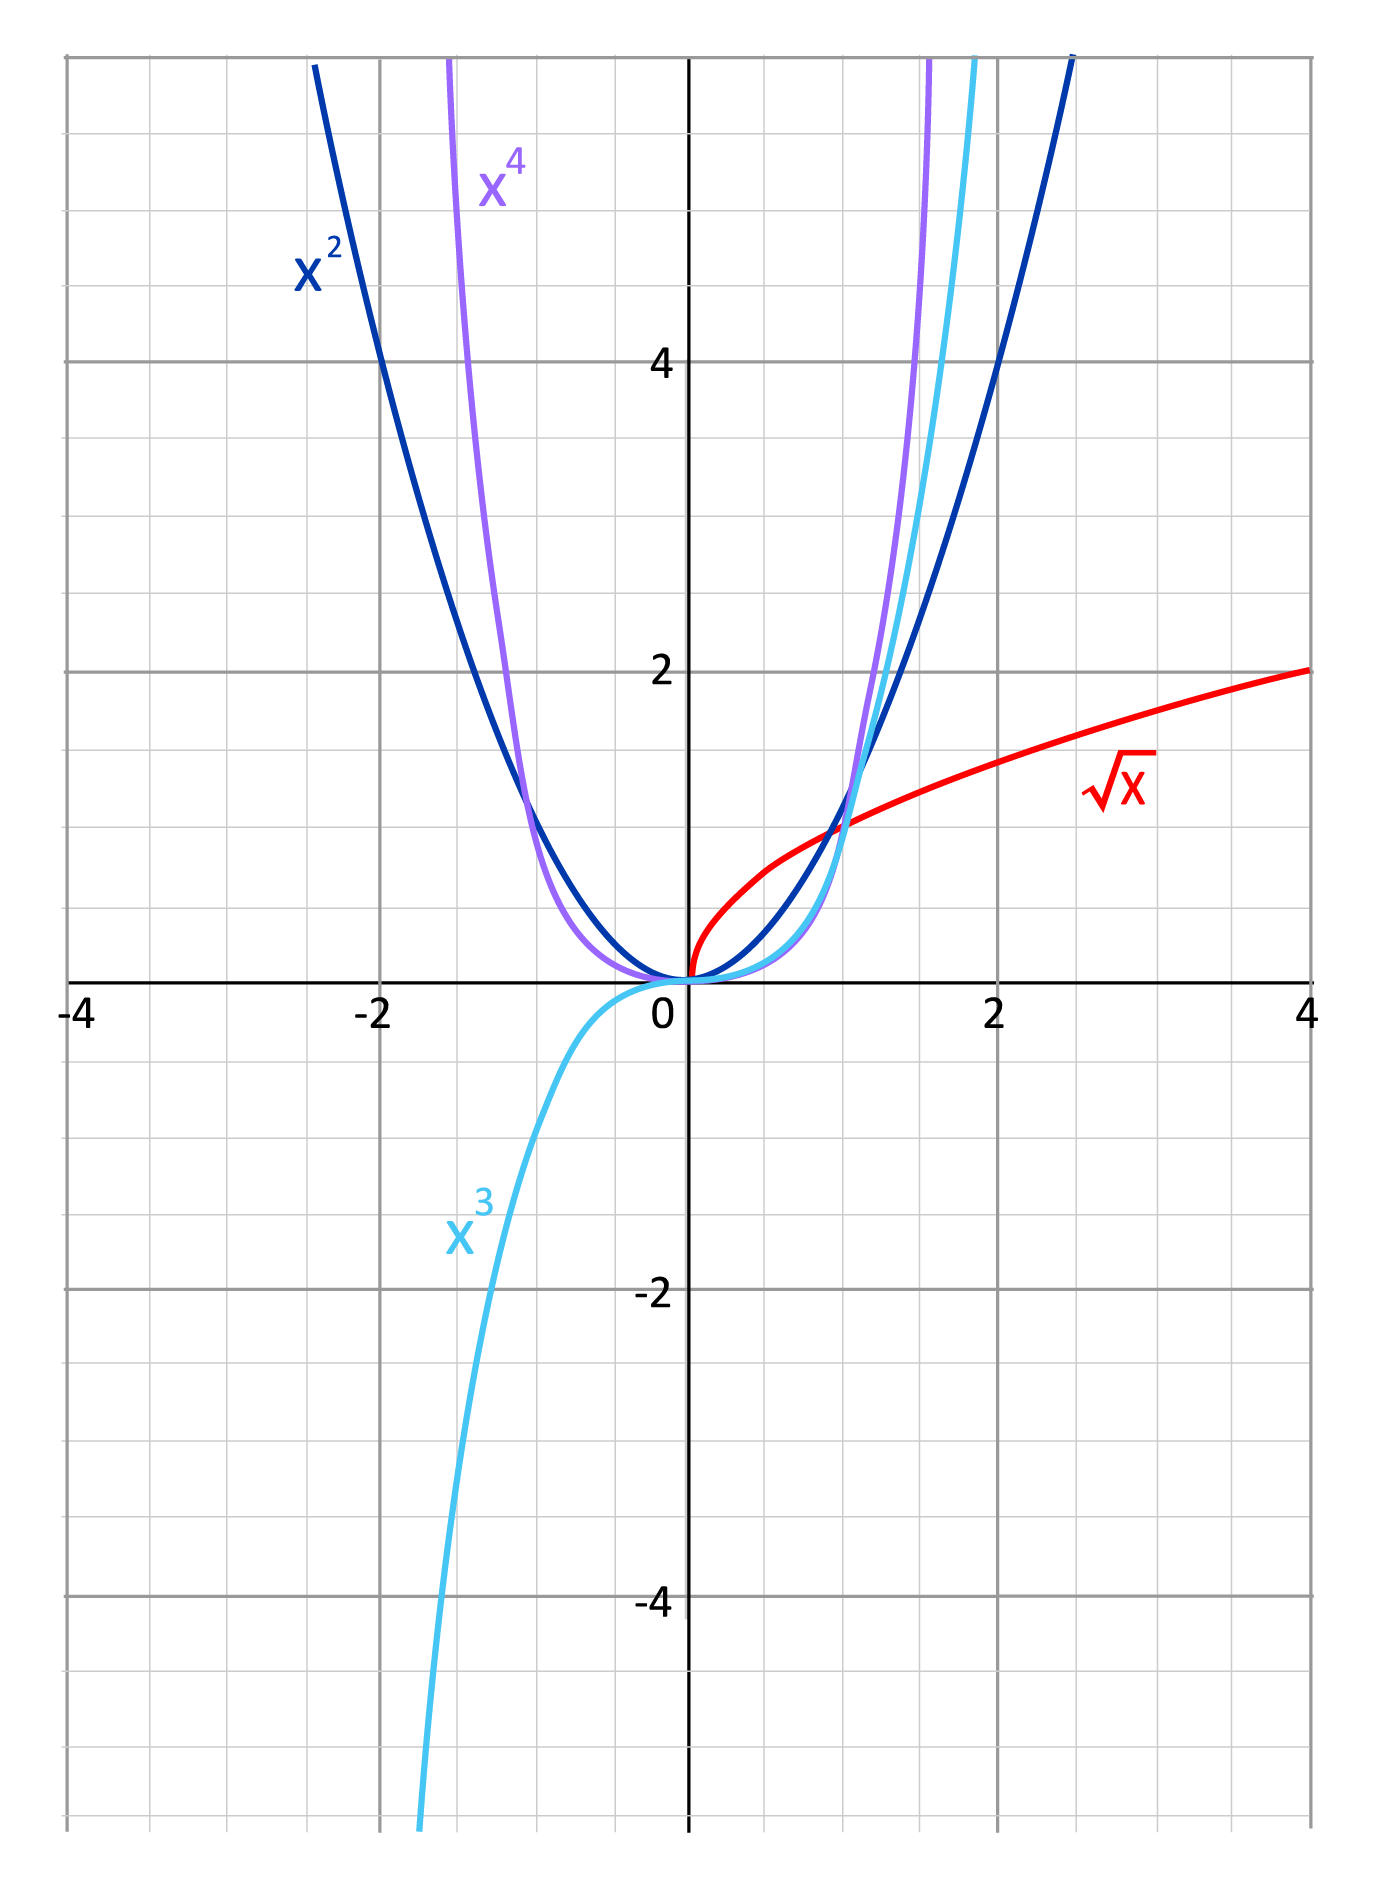 square root of x, x squared, x cubed, and x to the fourth graphed